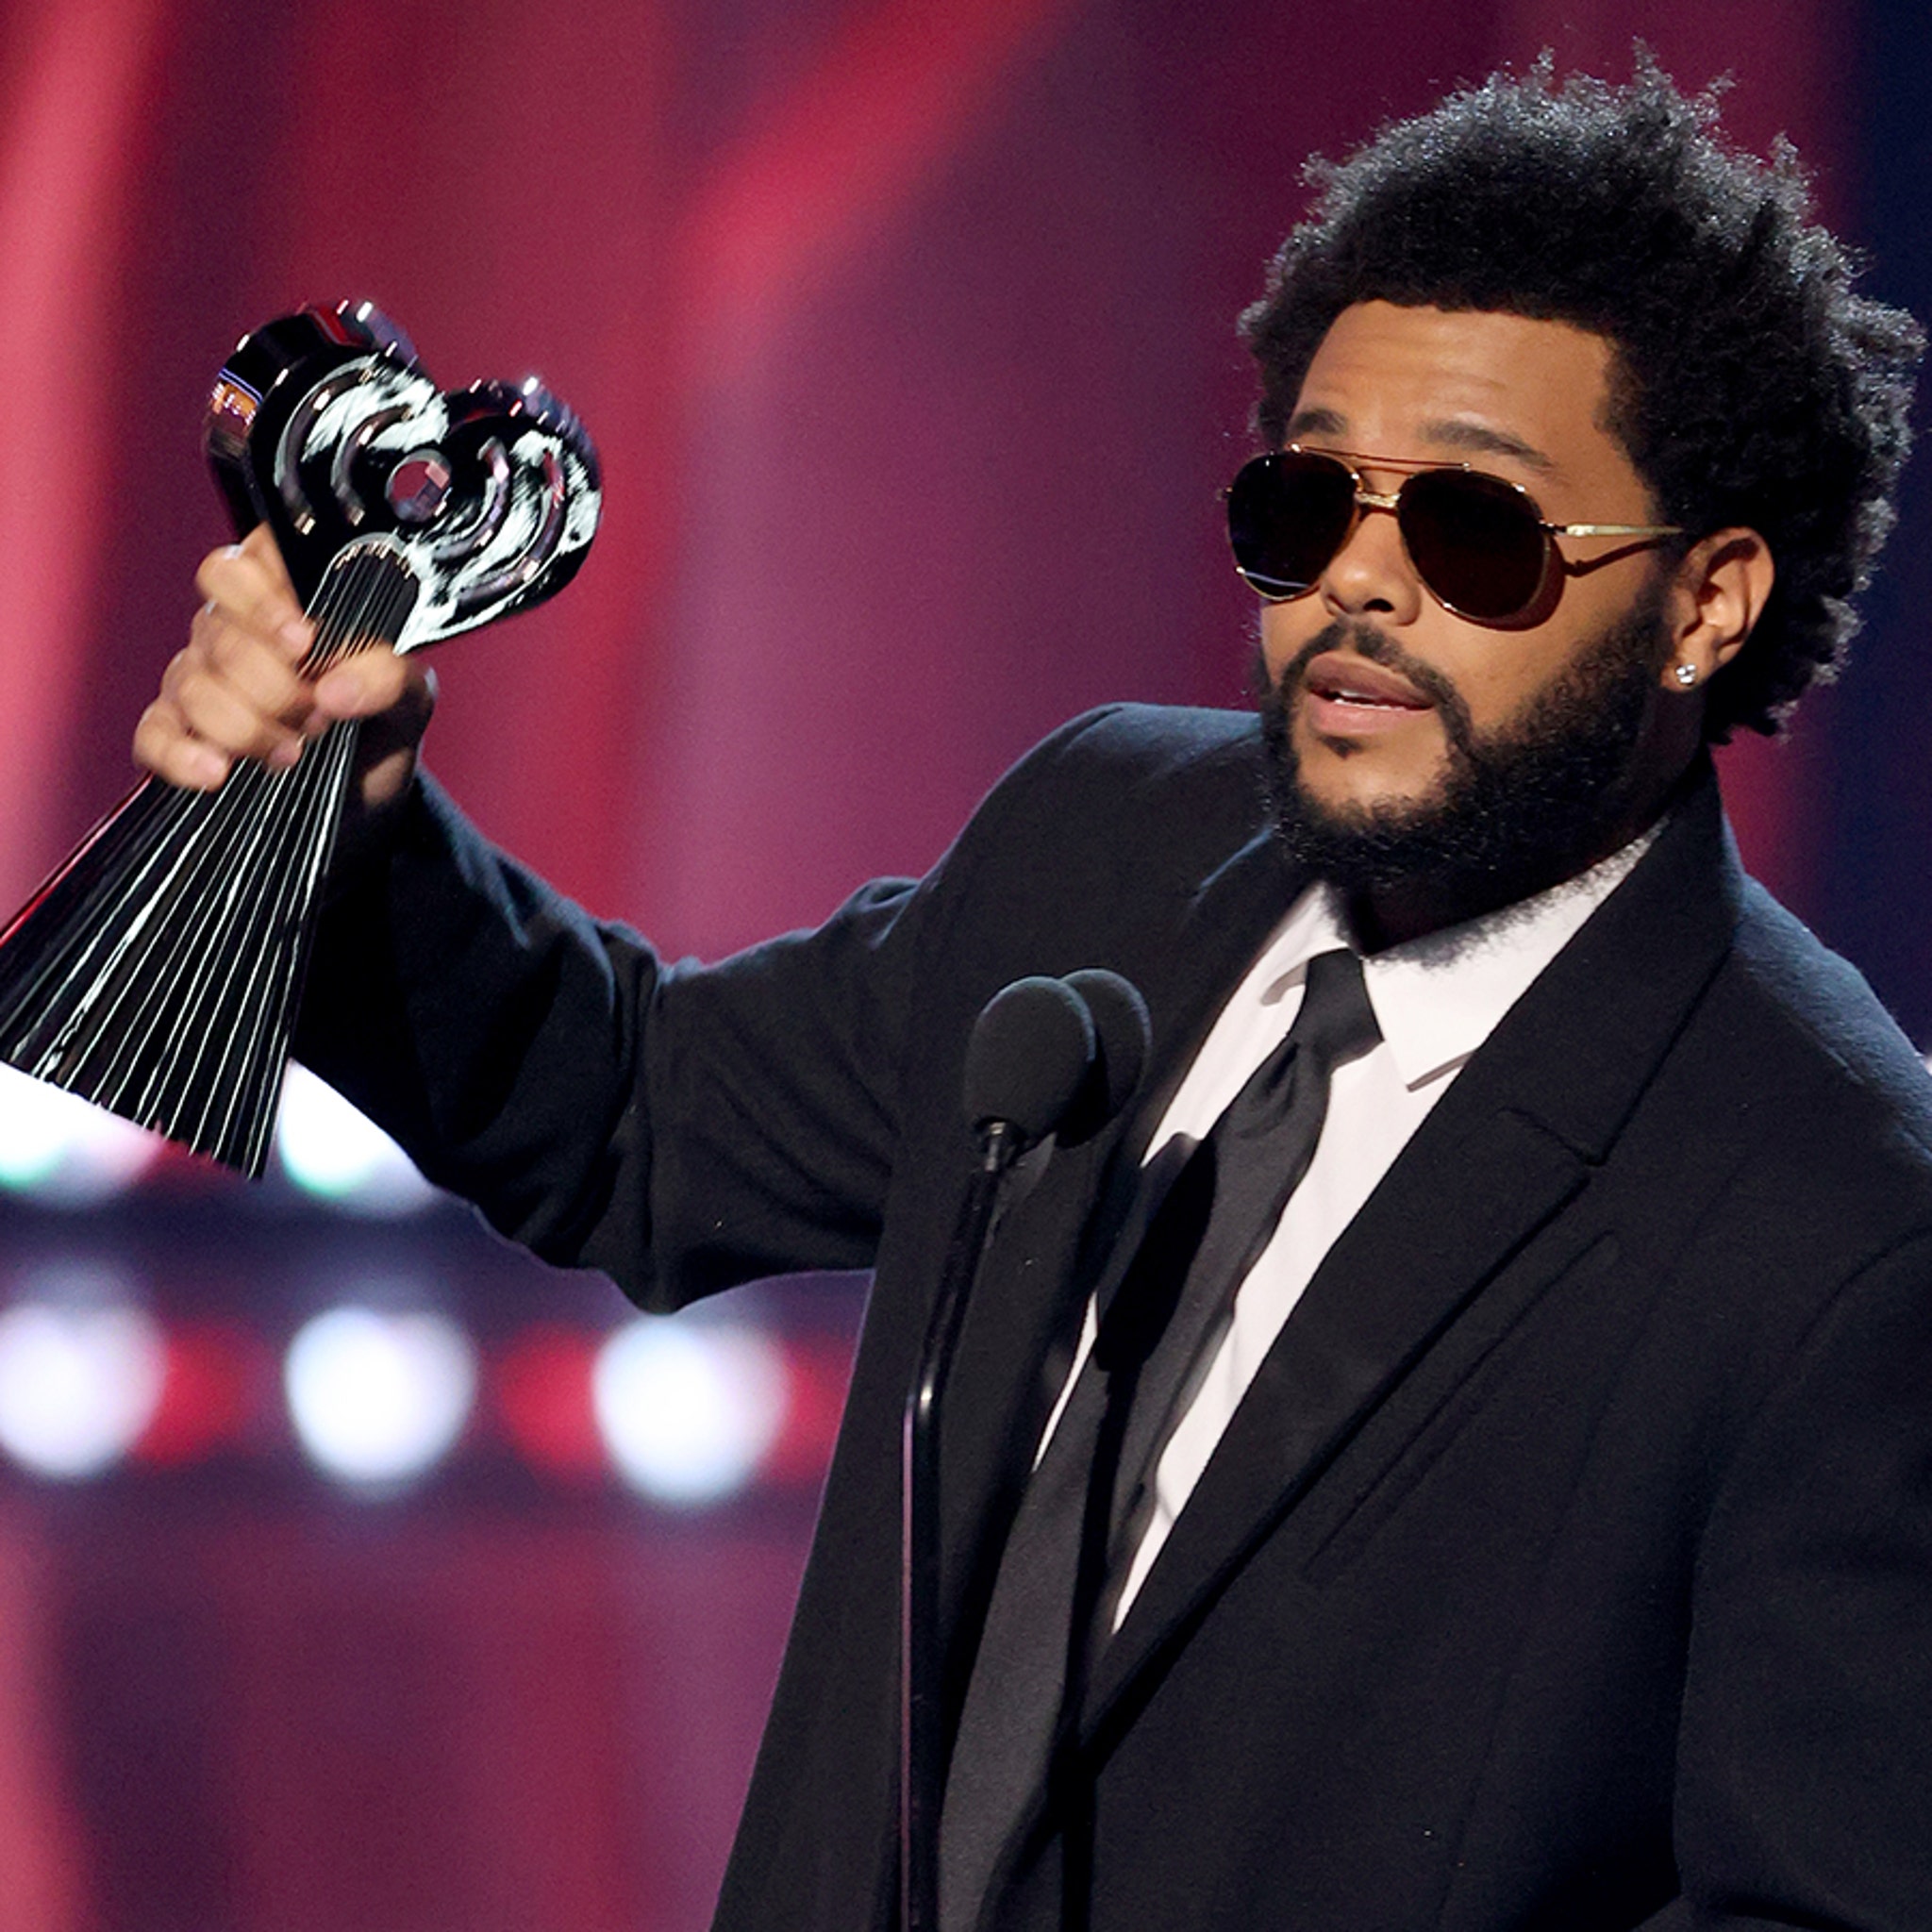 The Weeknd Doesn't Care About Grammys Anymore—Now He Wants An Emmy